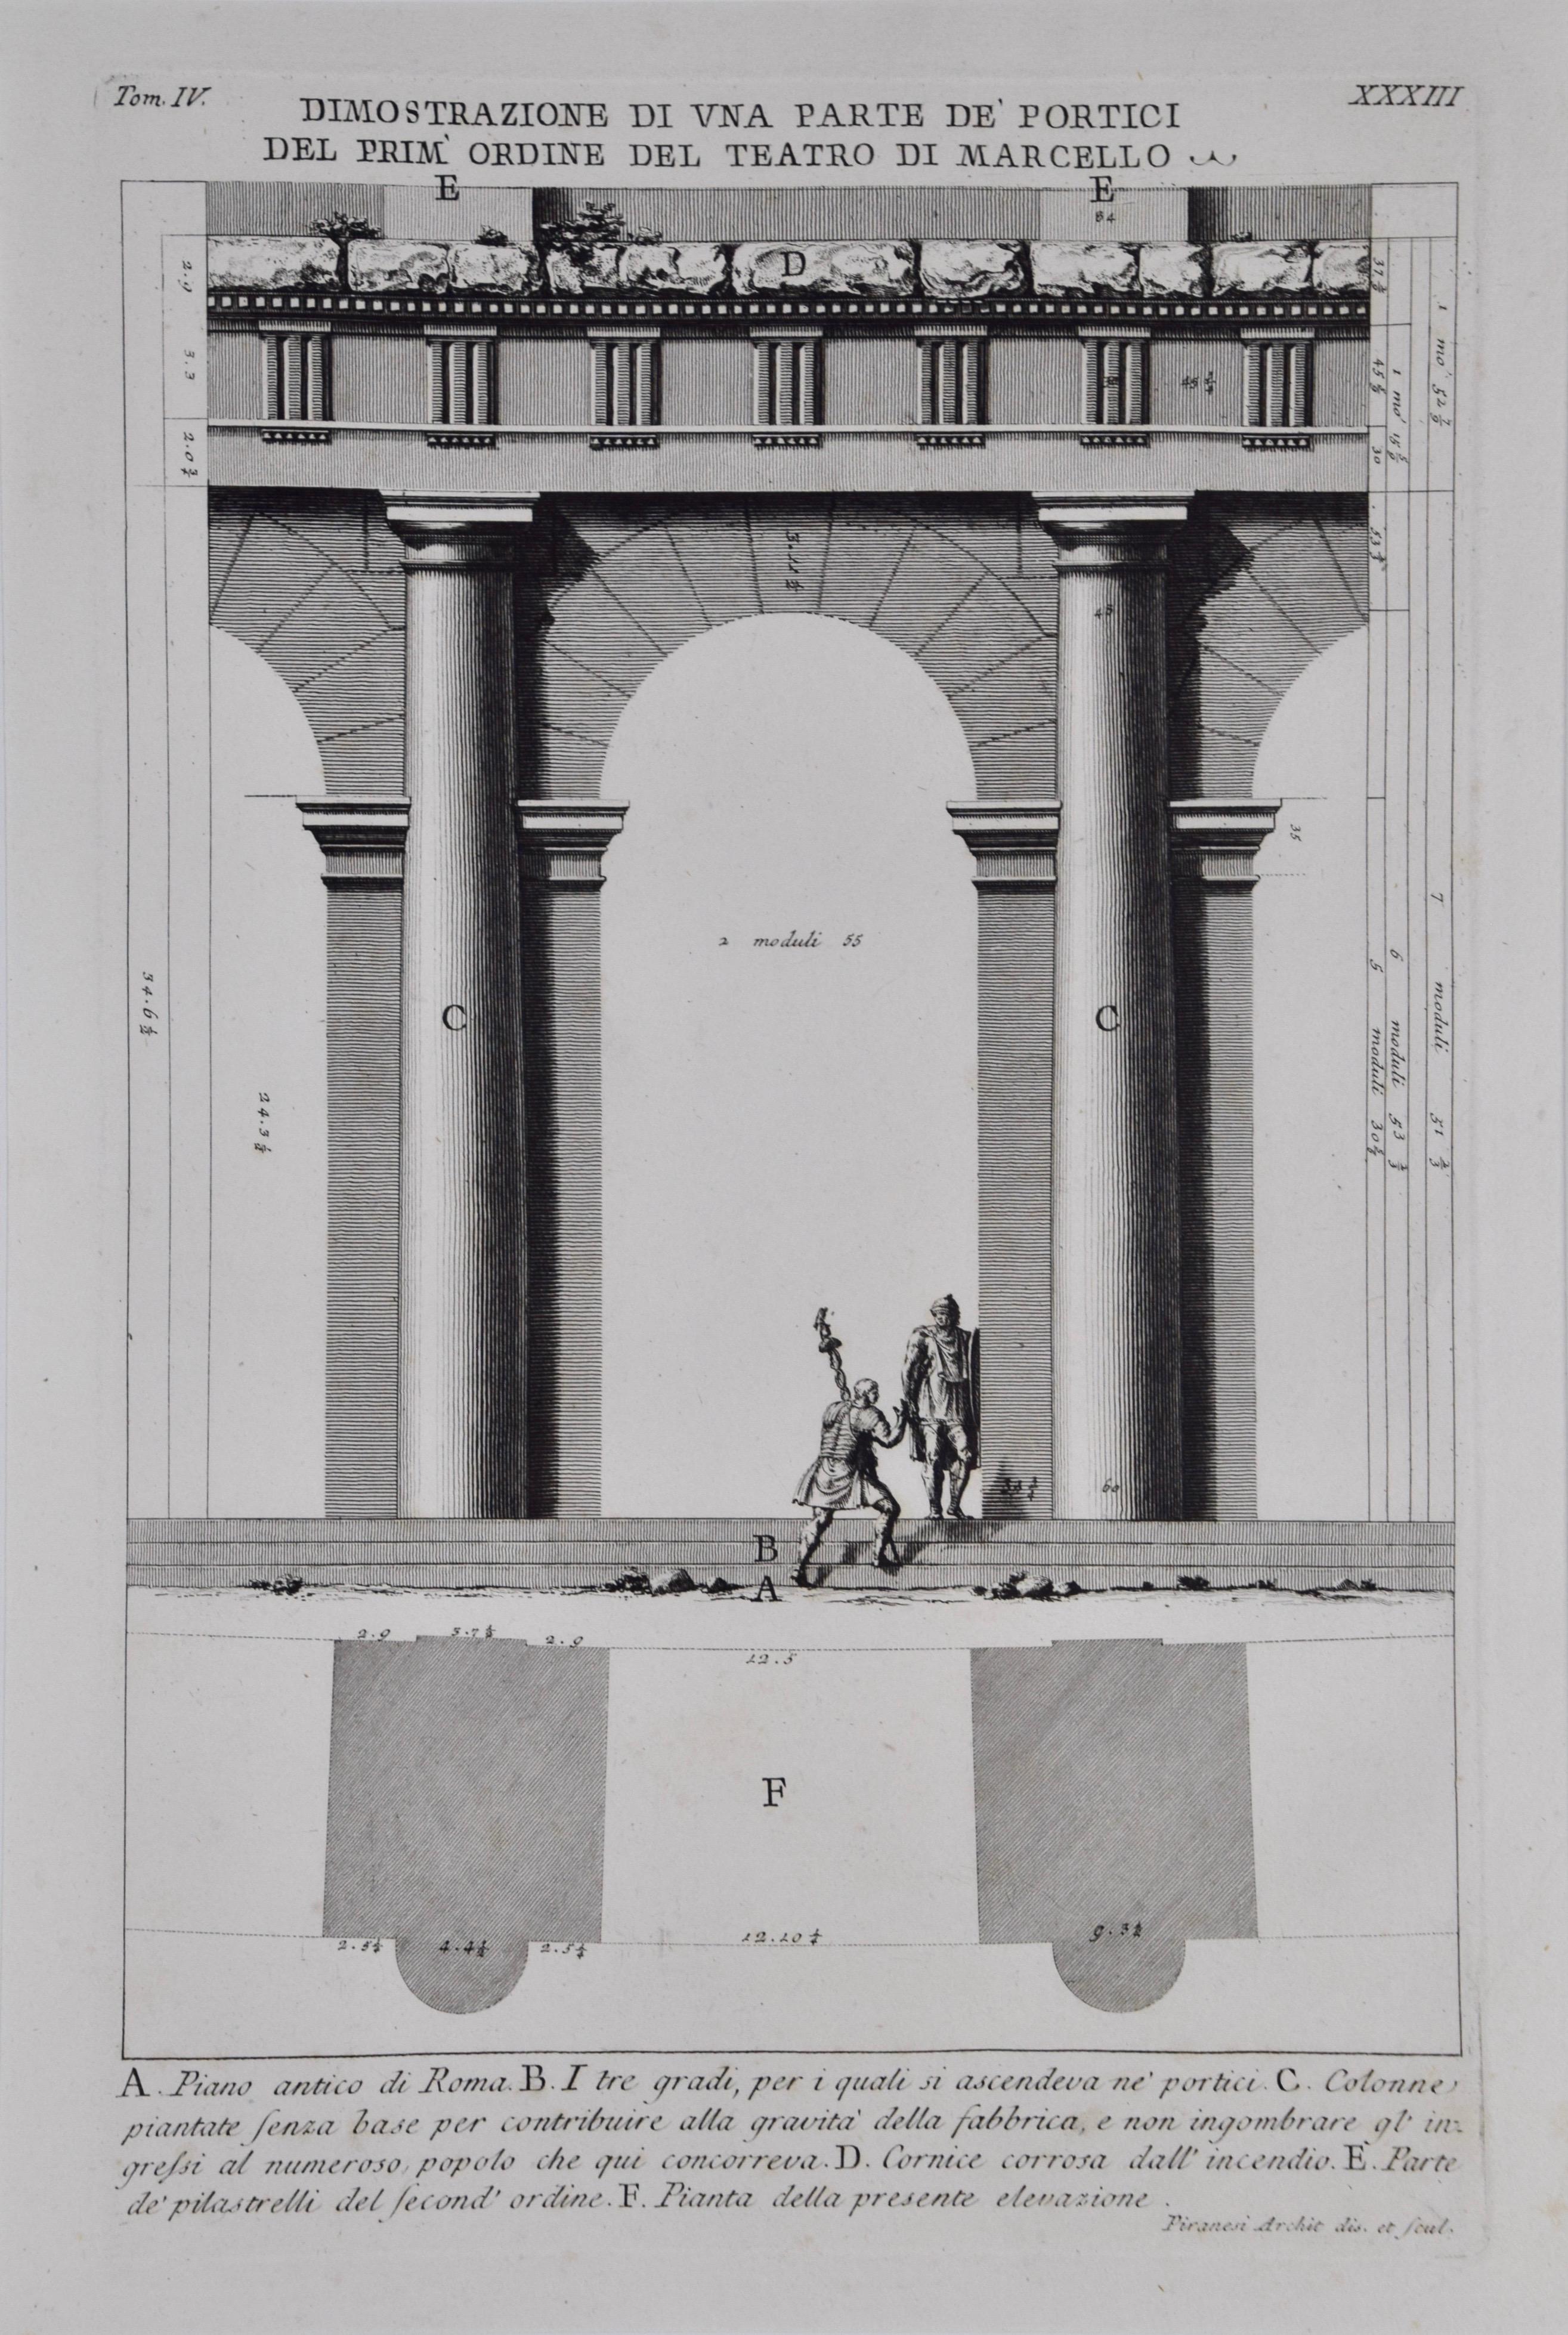 A pair of etchings created by Giovanni Piranesi depicting Roman architectural details from his 